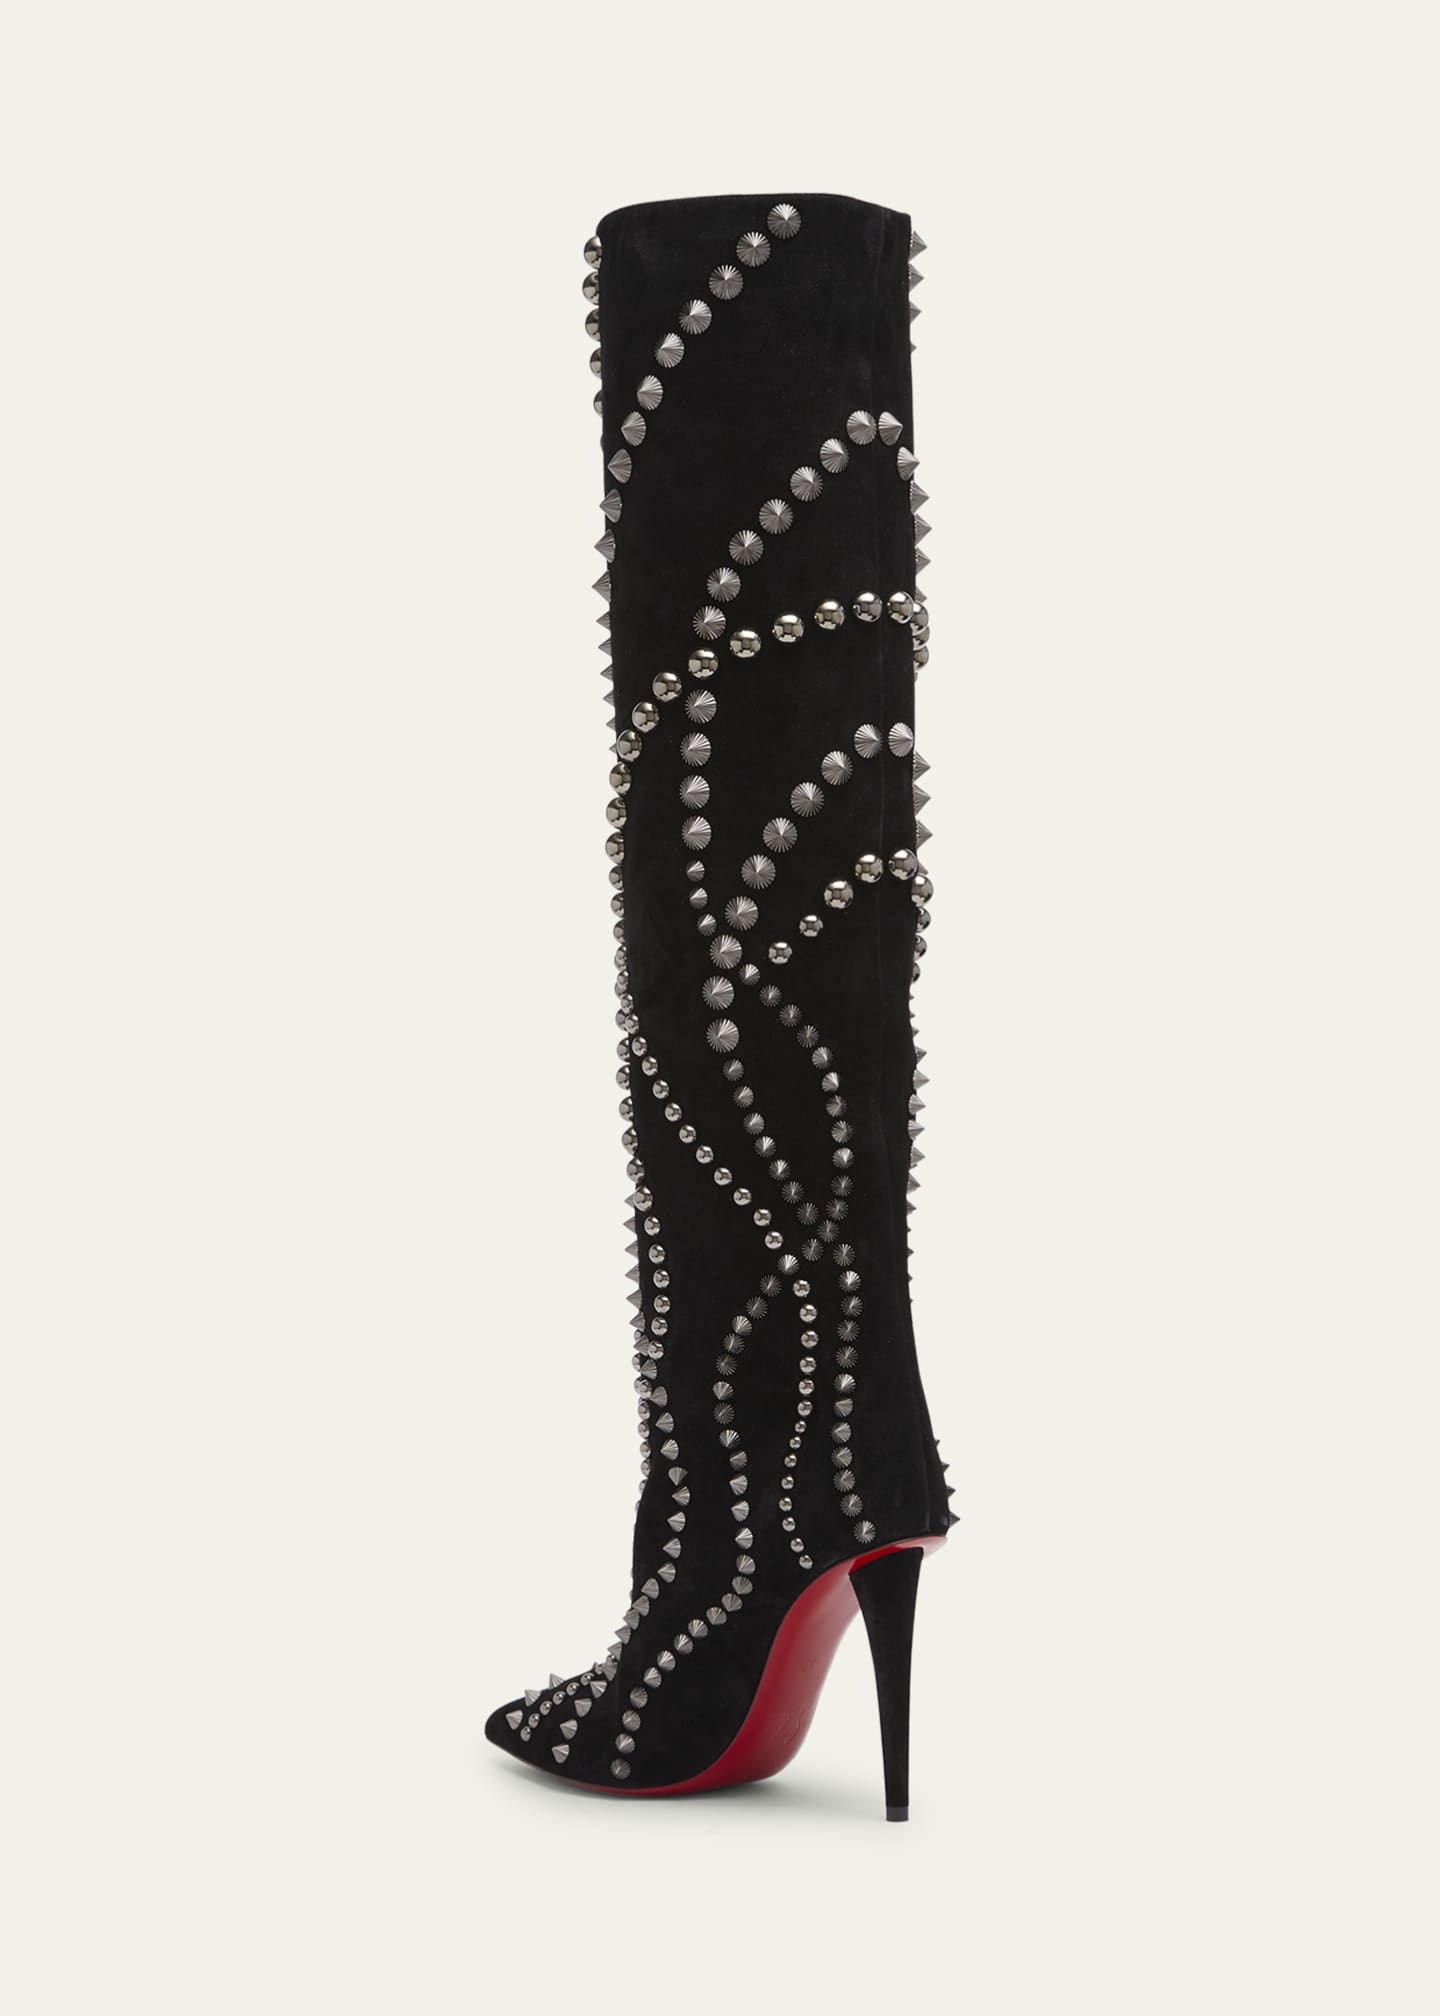 Christian Louboutin Astrilarge Botta Pika Red Sole Studded Suede Knee-High Boots, Black, Women's, 40eu, Boots Knee-High Boots & Riding Boots